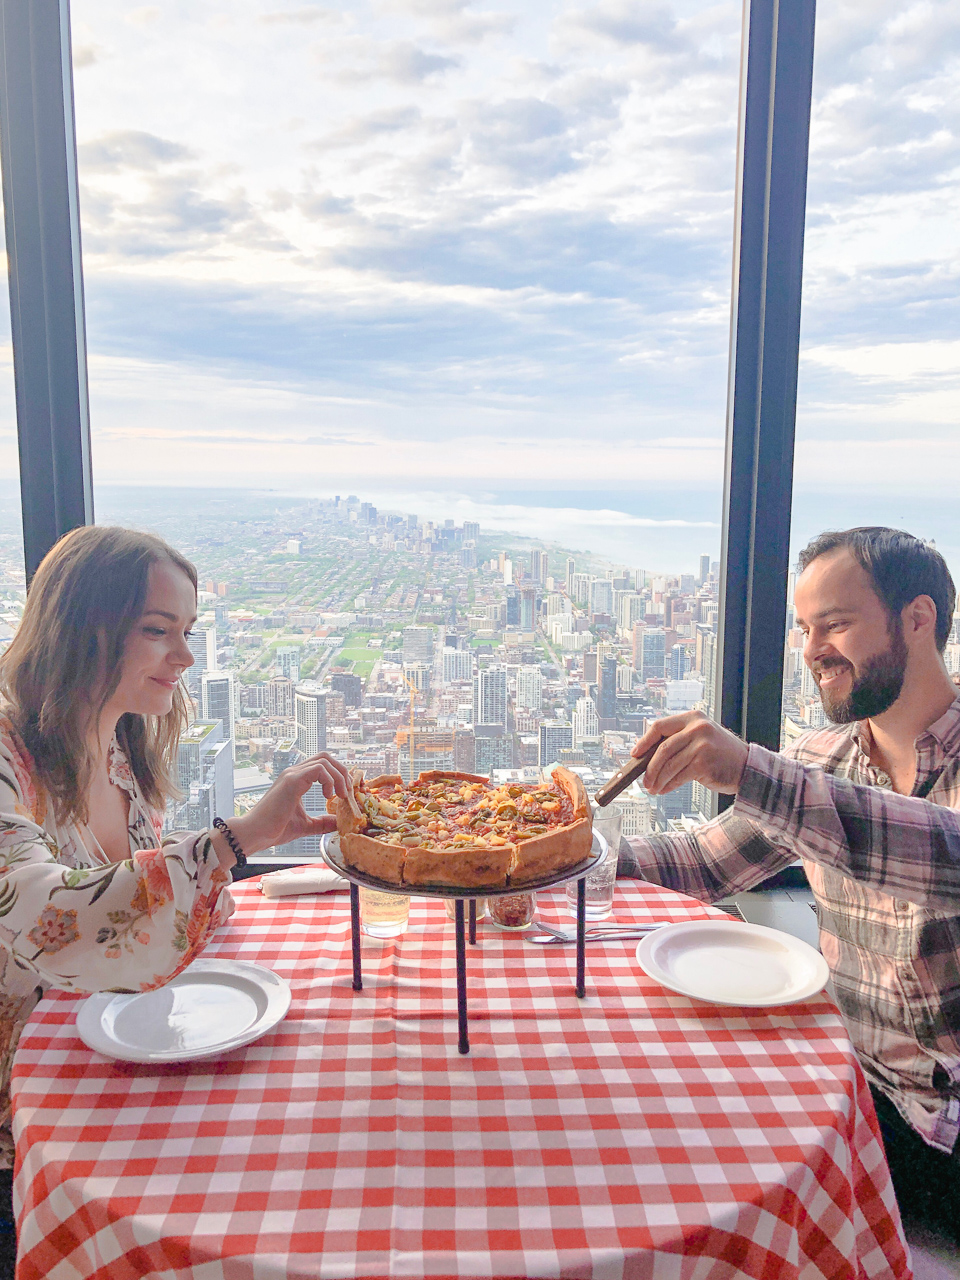 Pie in the Sky Chicago Skydeck